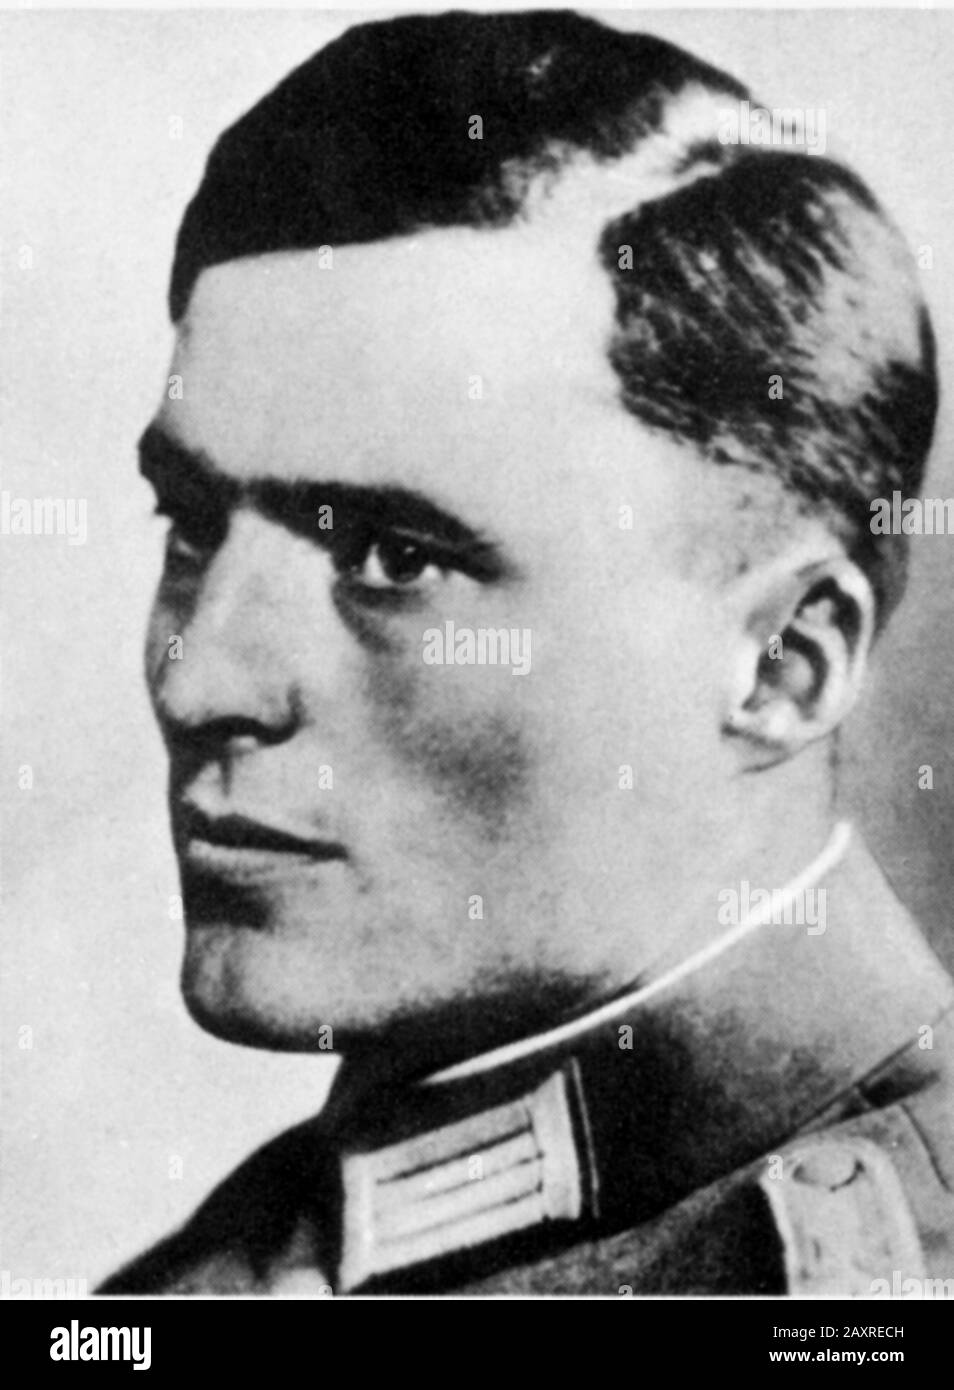 1934 ca , GERMANY  : The german Nazi Colonel Graf Klaus SCHENK Von STAUFFENBERG ( 1907 - 1944 ). As a German army officer and aristocrat who was one of the leading members of the failed 20 July plot of 1944 to assassinate Adolf Hitler and remove the Nazi Party from power. Along with Henning von Tresckow and Hans Oster, he was one of the central figures of the German Resistance movement within the Wehrmacht . For his involvement in the movement he was shot shortly after the failed attempt known as Operation Valkyrie - OPERAZIONE VALKIRIA - Valchiria - CLAUS -  Conte - WWII - NAZI - NAZIST - SEC Stock Photo